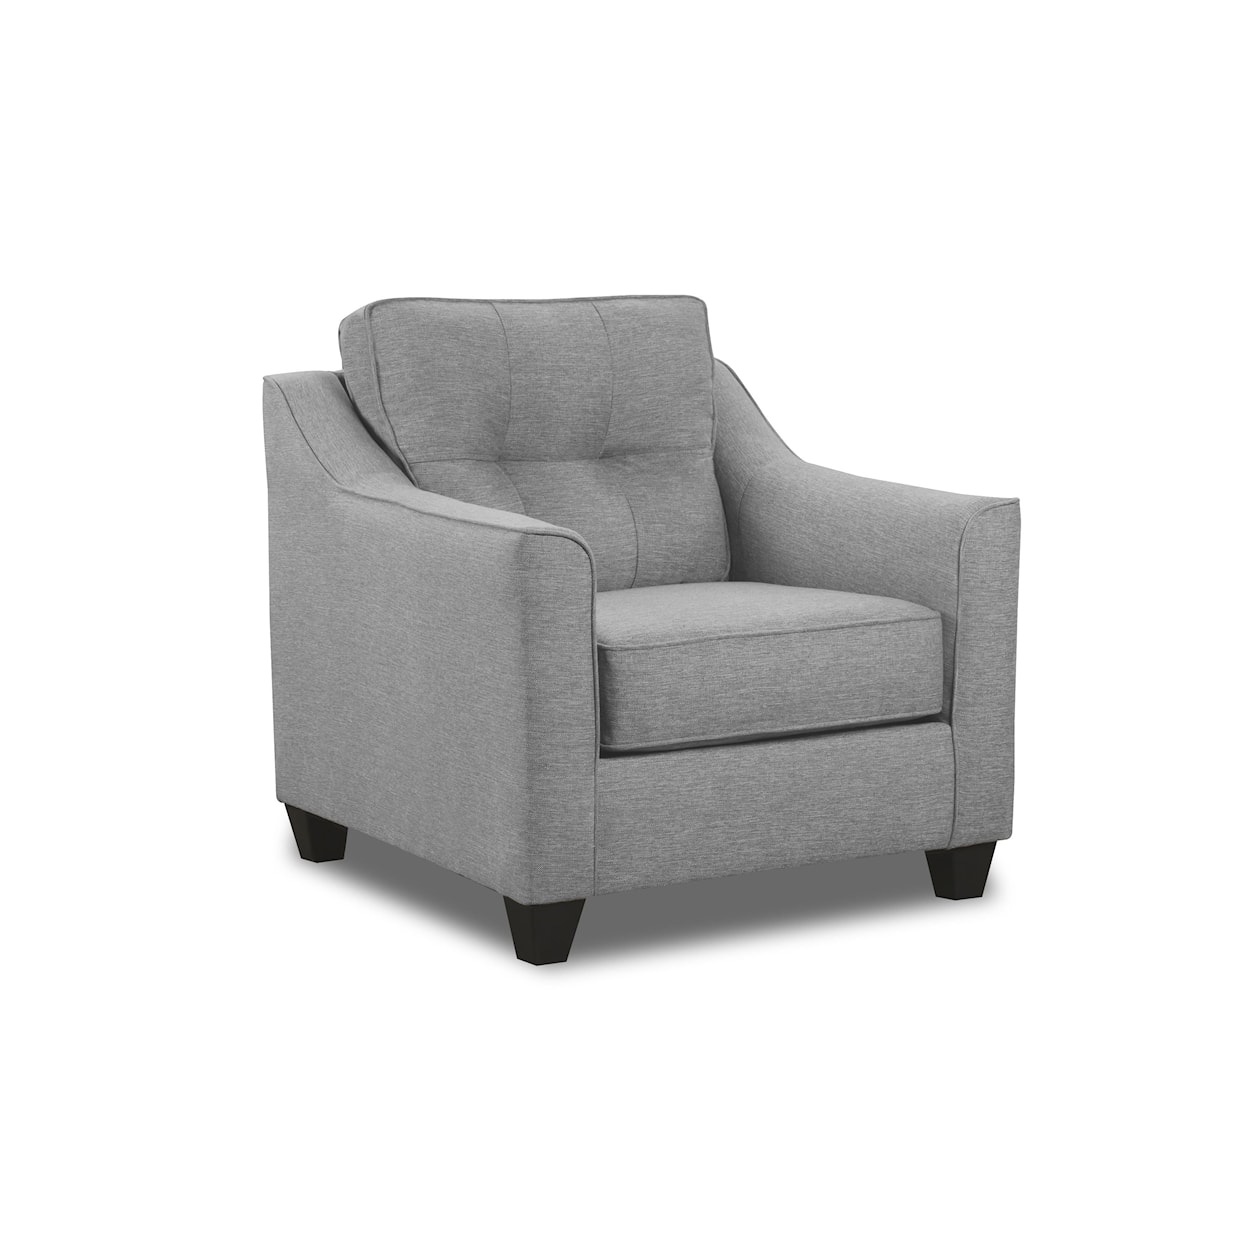 Behold Home 4990 Rome Stationary Chair with Button-Tufting